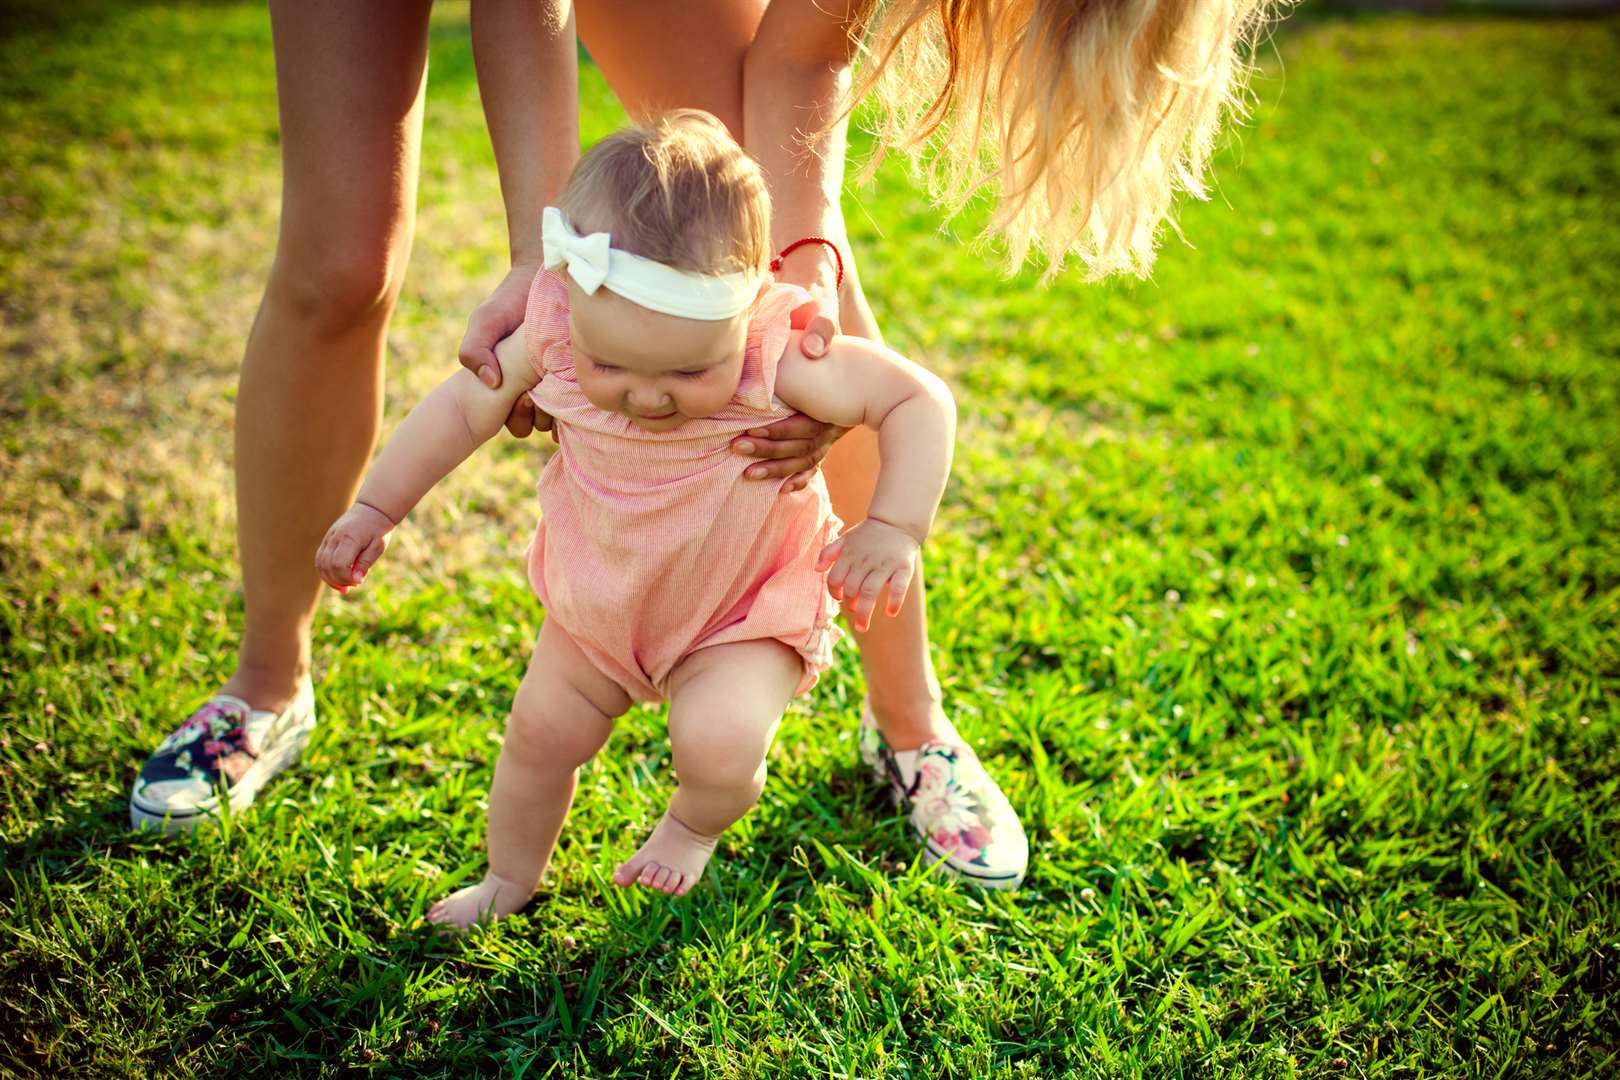 If your friend is really proud of her baby for taking her first steps, for example, share in her pride